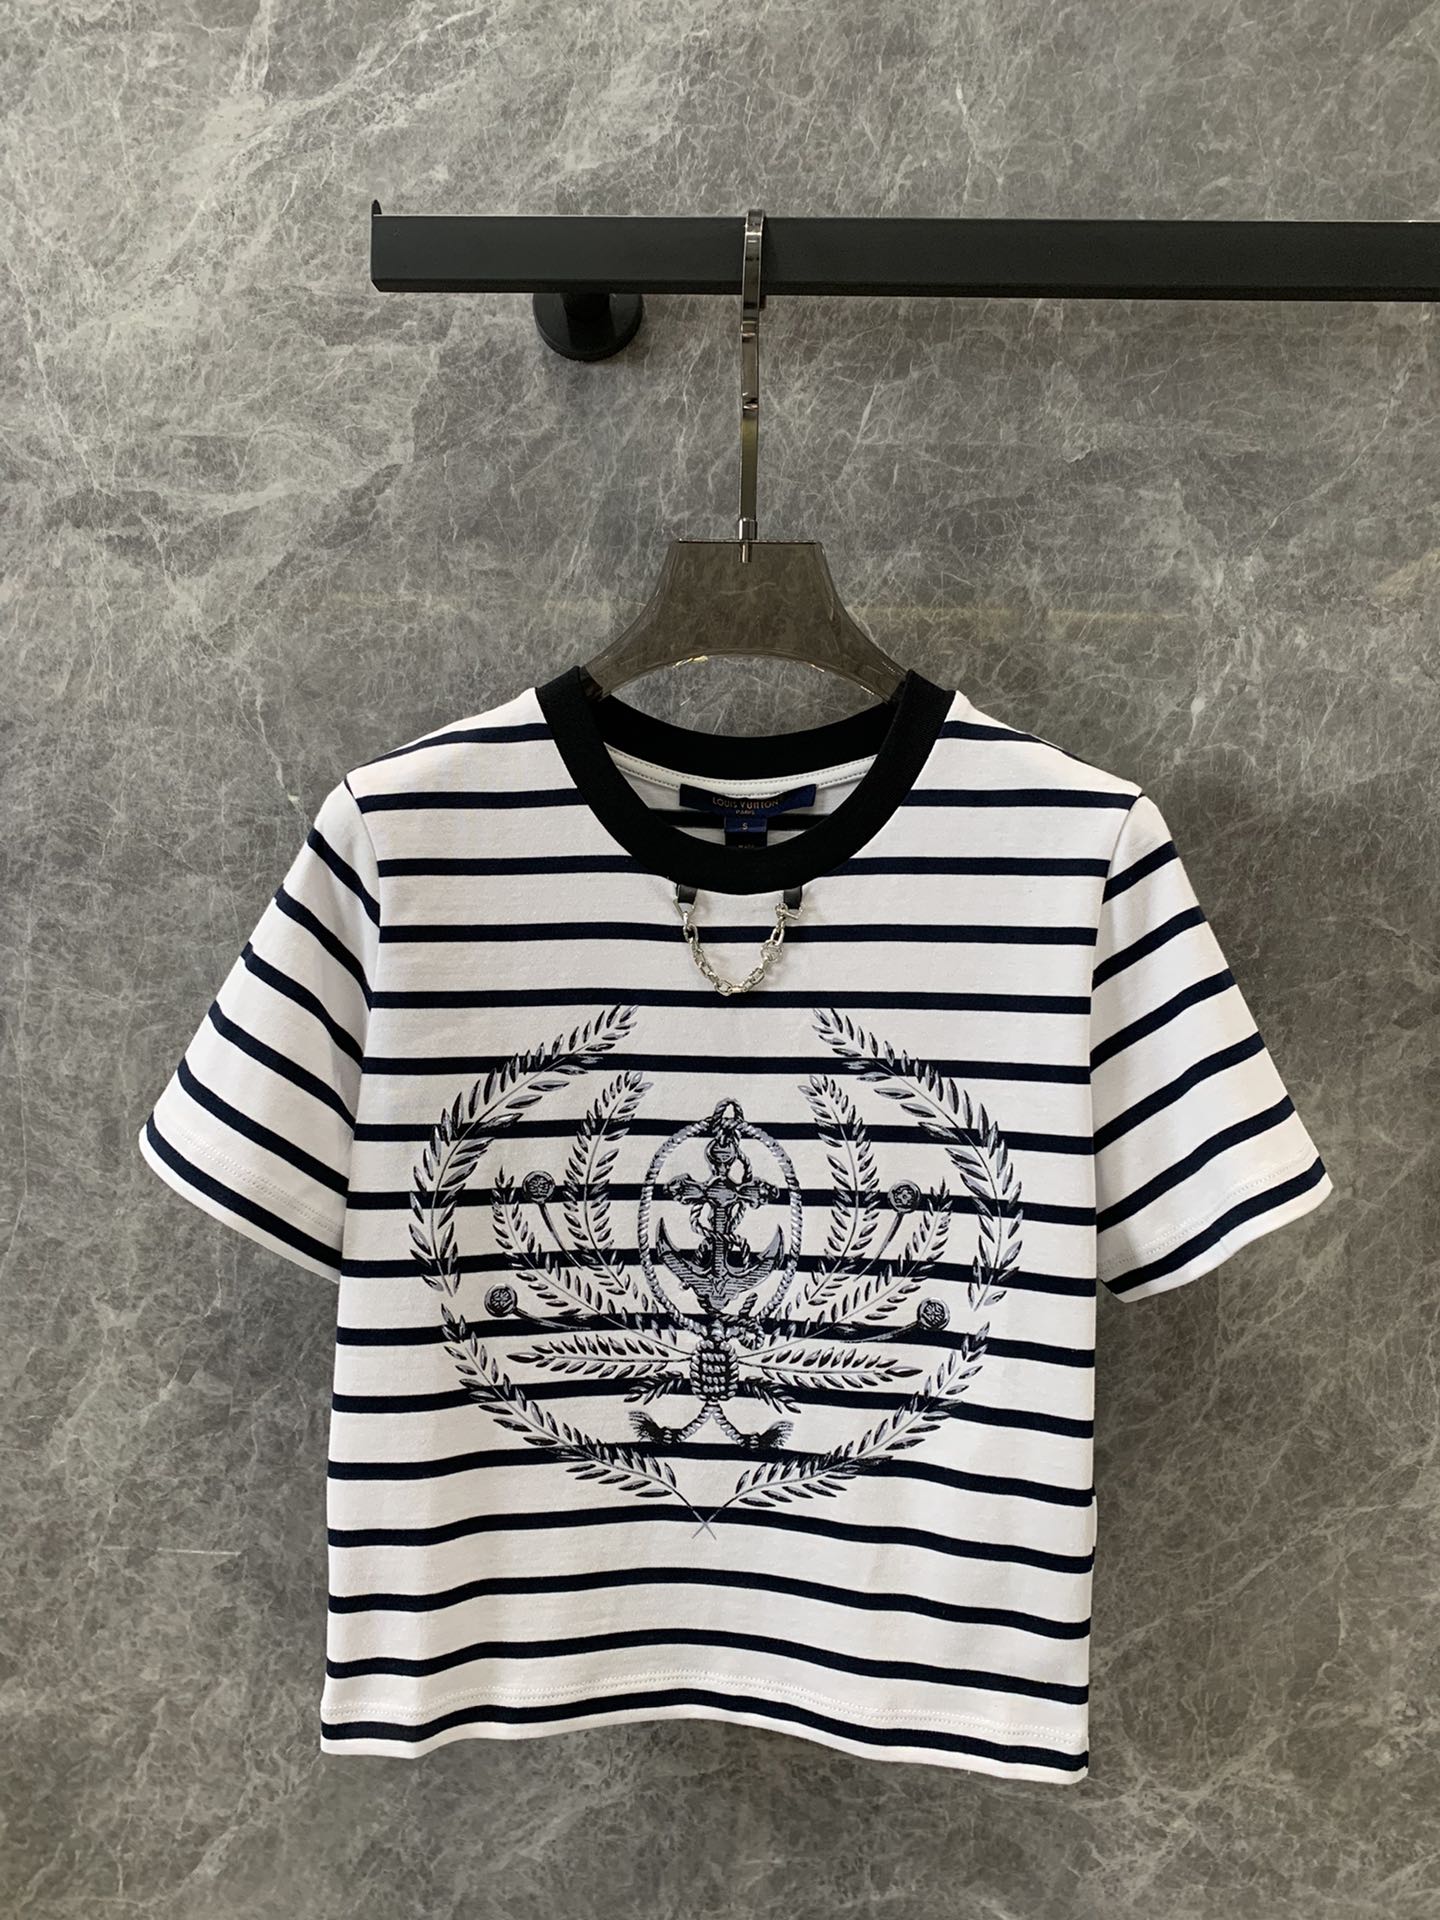 Louis Vuitton AAA
 Clothing T-Shirt website to buy replica
 Printing Cotton Spring/Summer Collection Short Sleeve